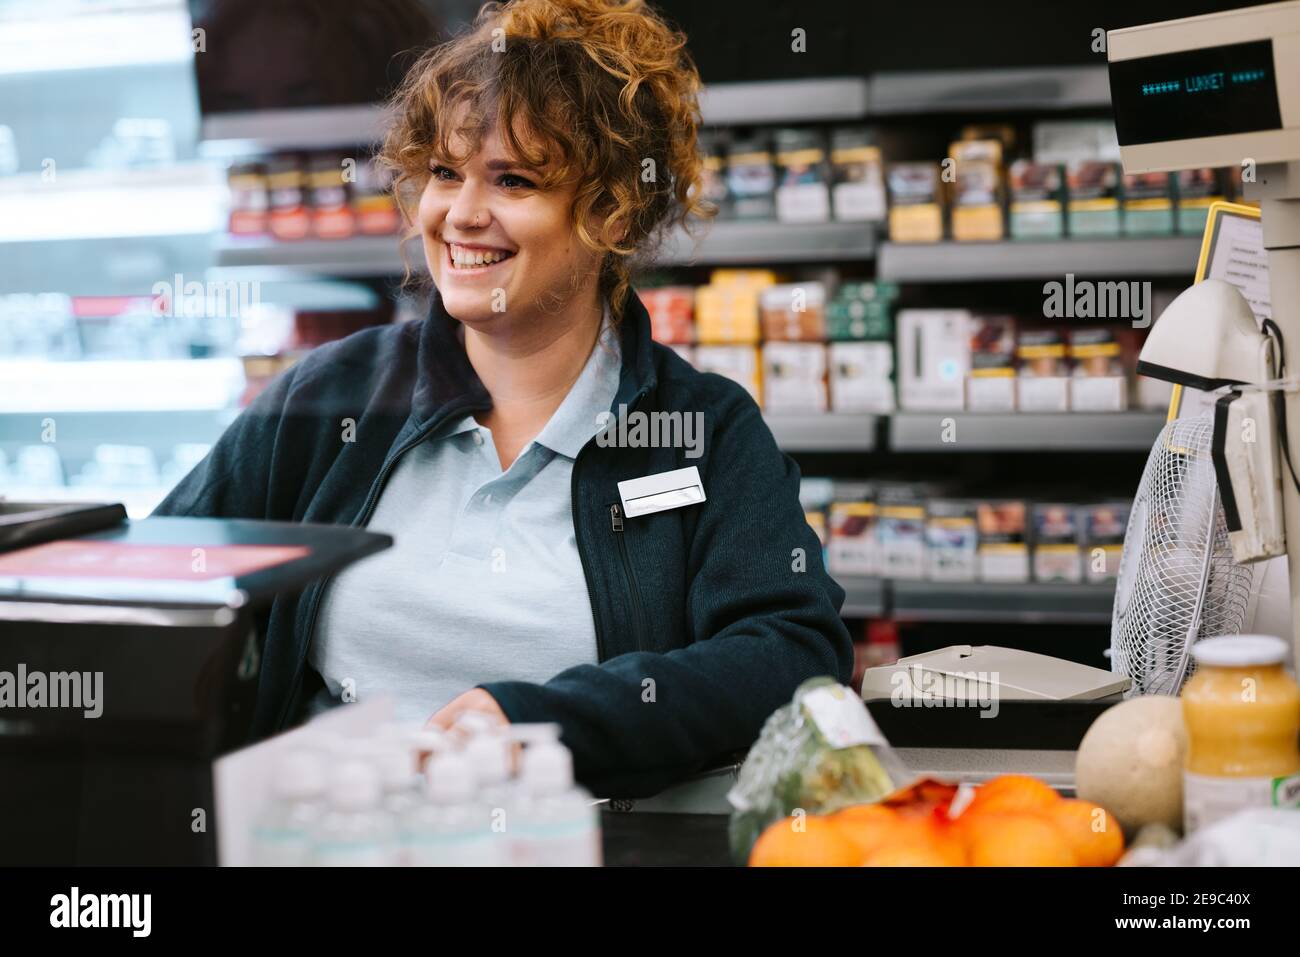 Happy woman cashier at a supermarket attending customer. Woman working at grocery store checkout talking with customer and smiling. Stock Photo